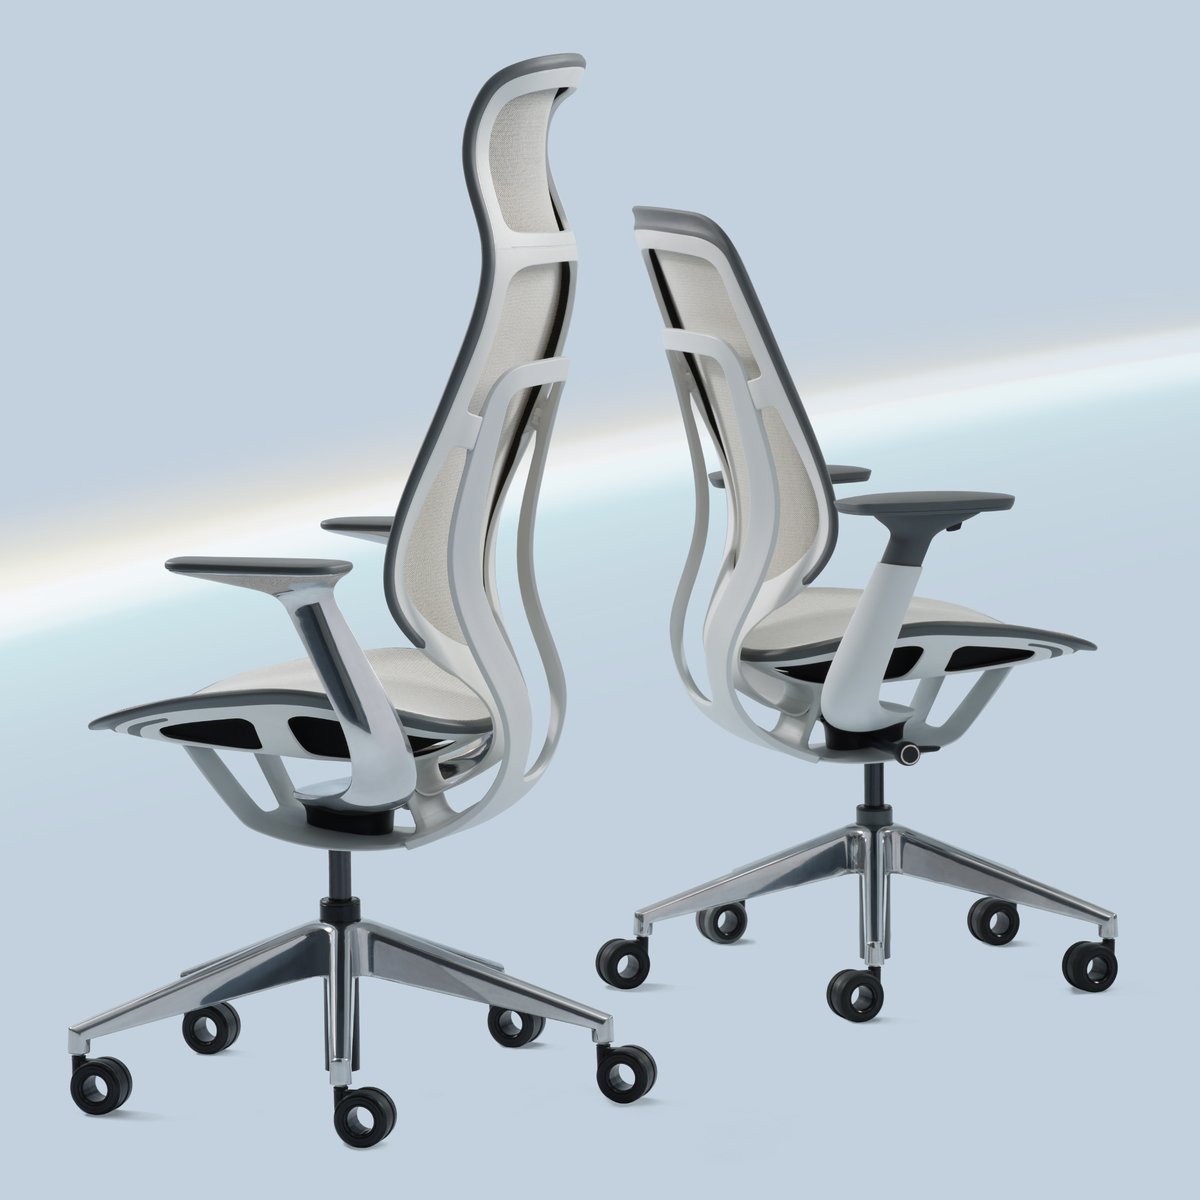 @Steelcase Karman is available now with a high back design. The full range of options provide effortless comfort and ergonomic support for anyone, in any setting. #steelcase #officechair #ergonomics